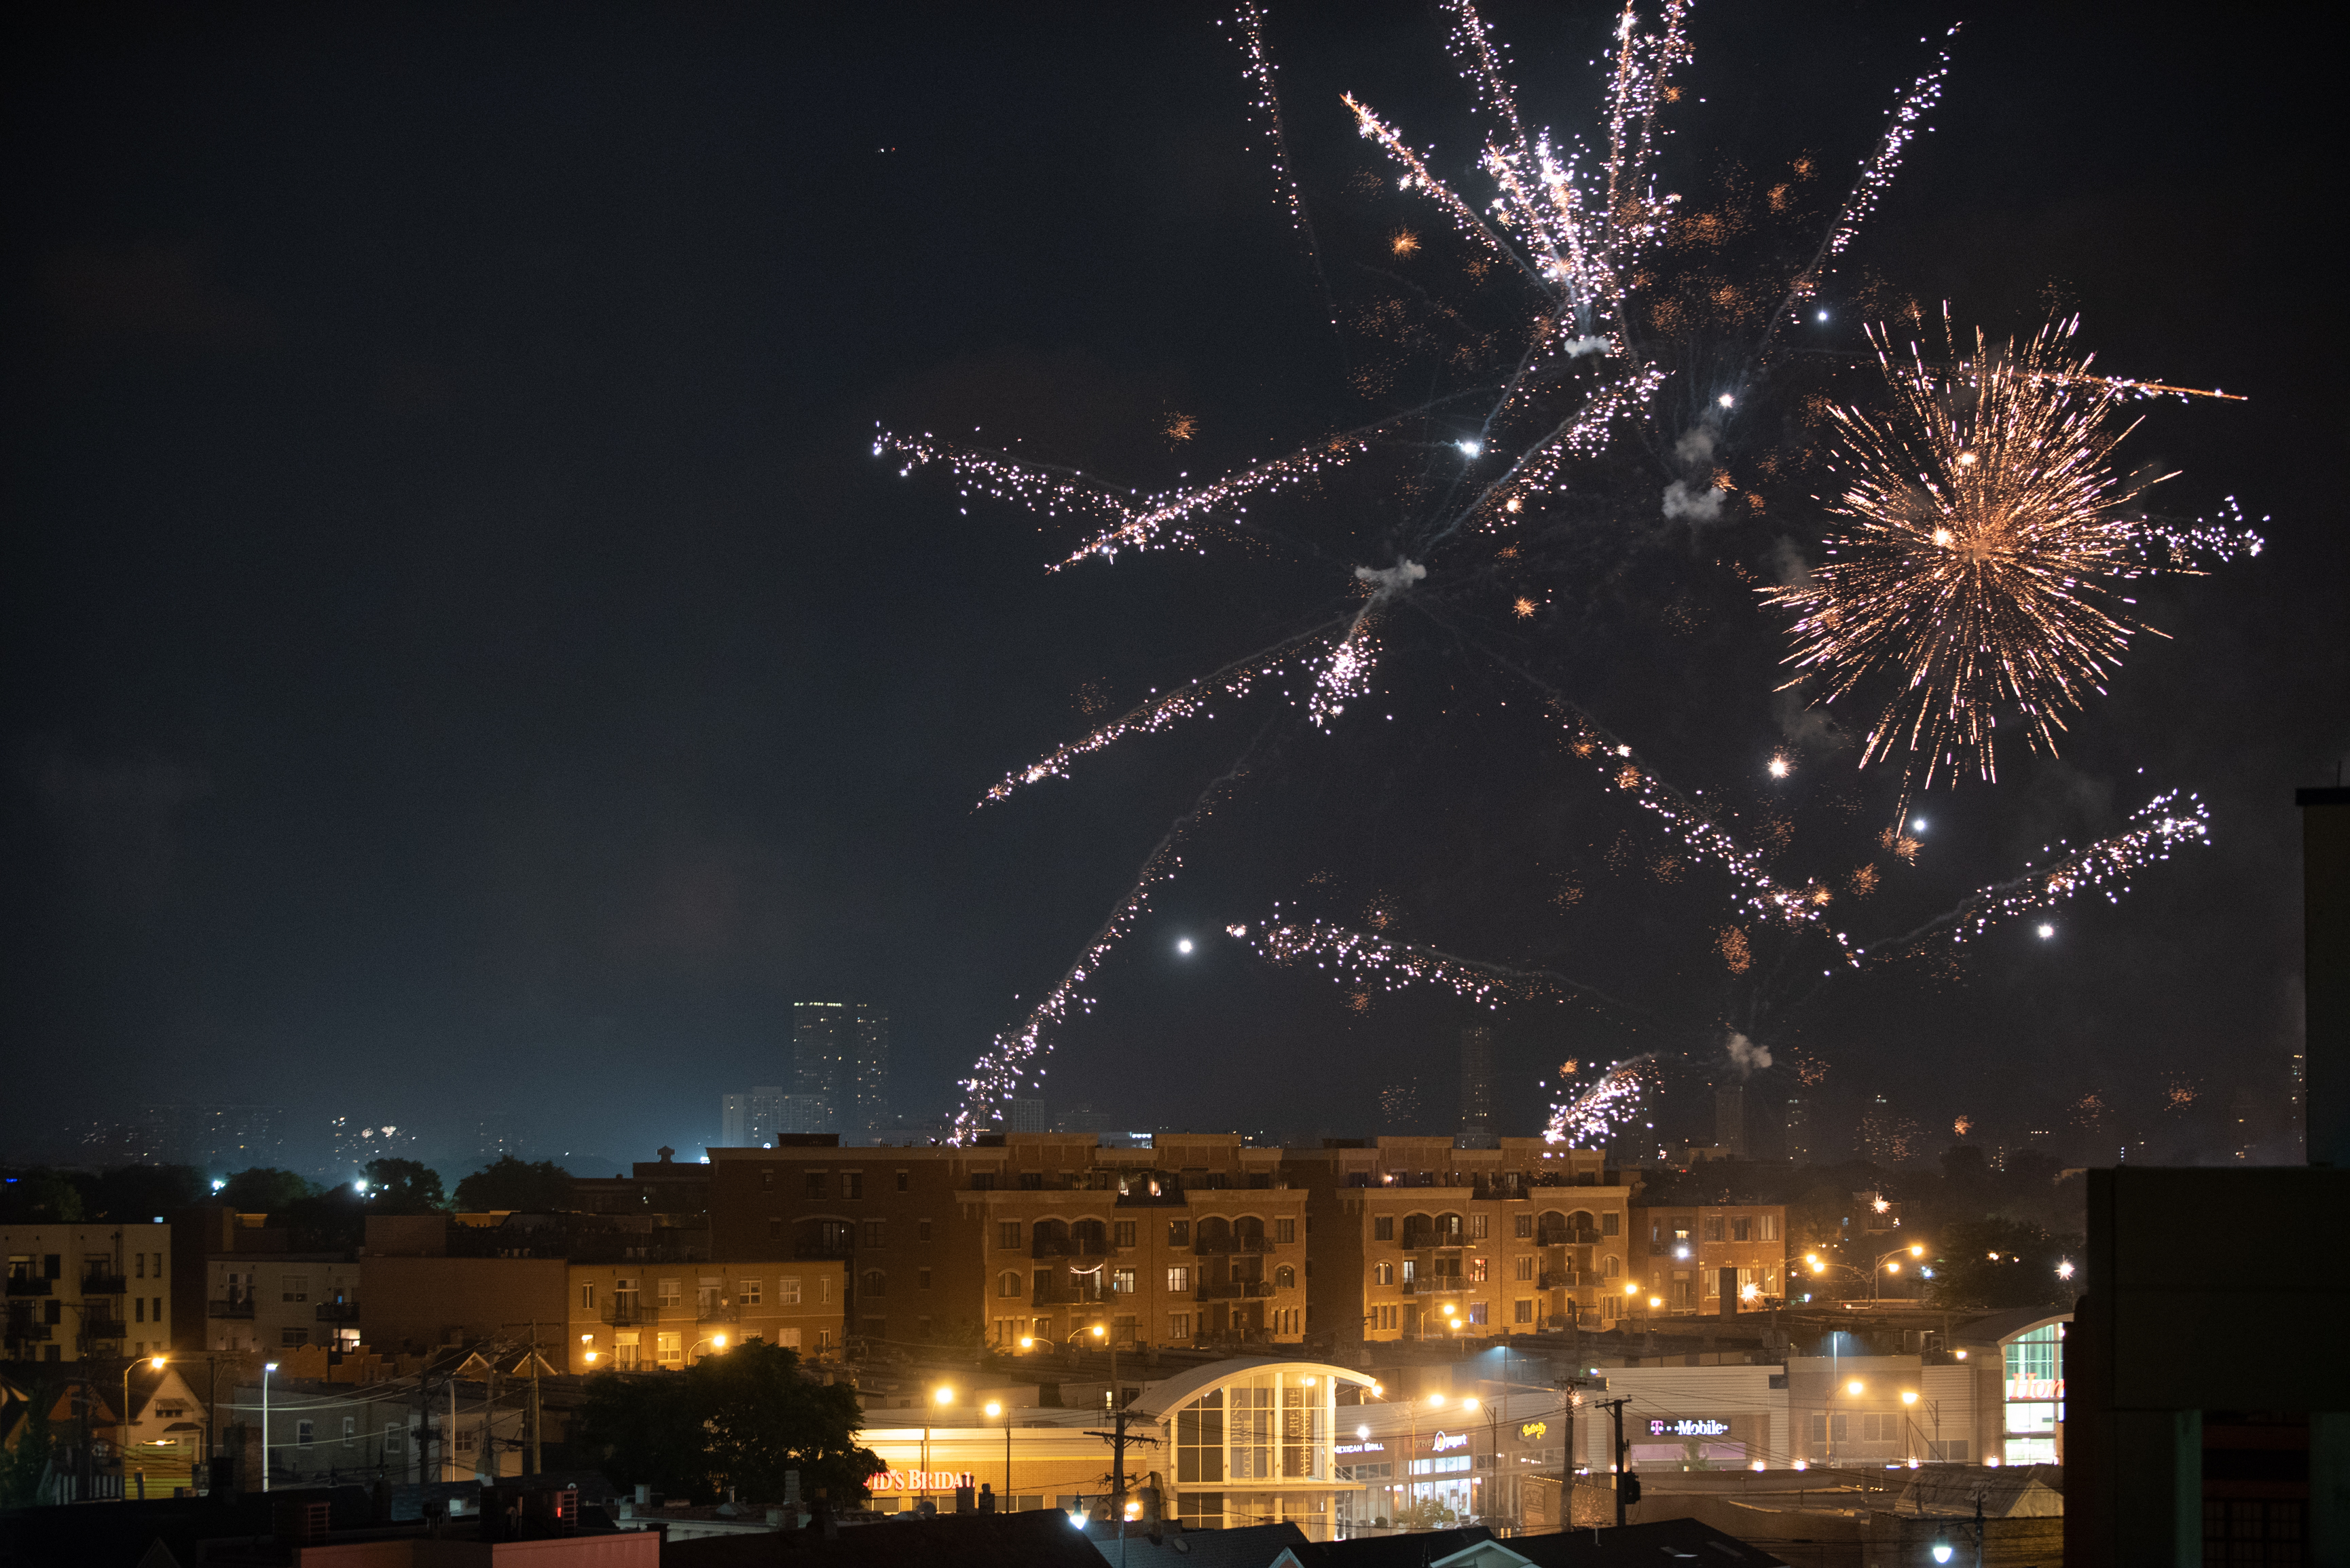 Fireworks Sales Skyrocket As Chicagoans Complain Of Loud Noisy Nights People Are Just Bored